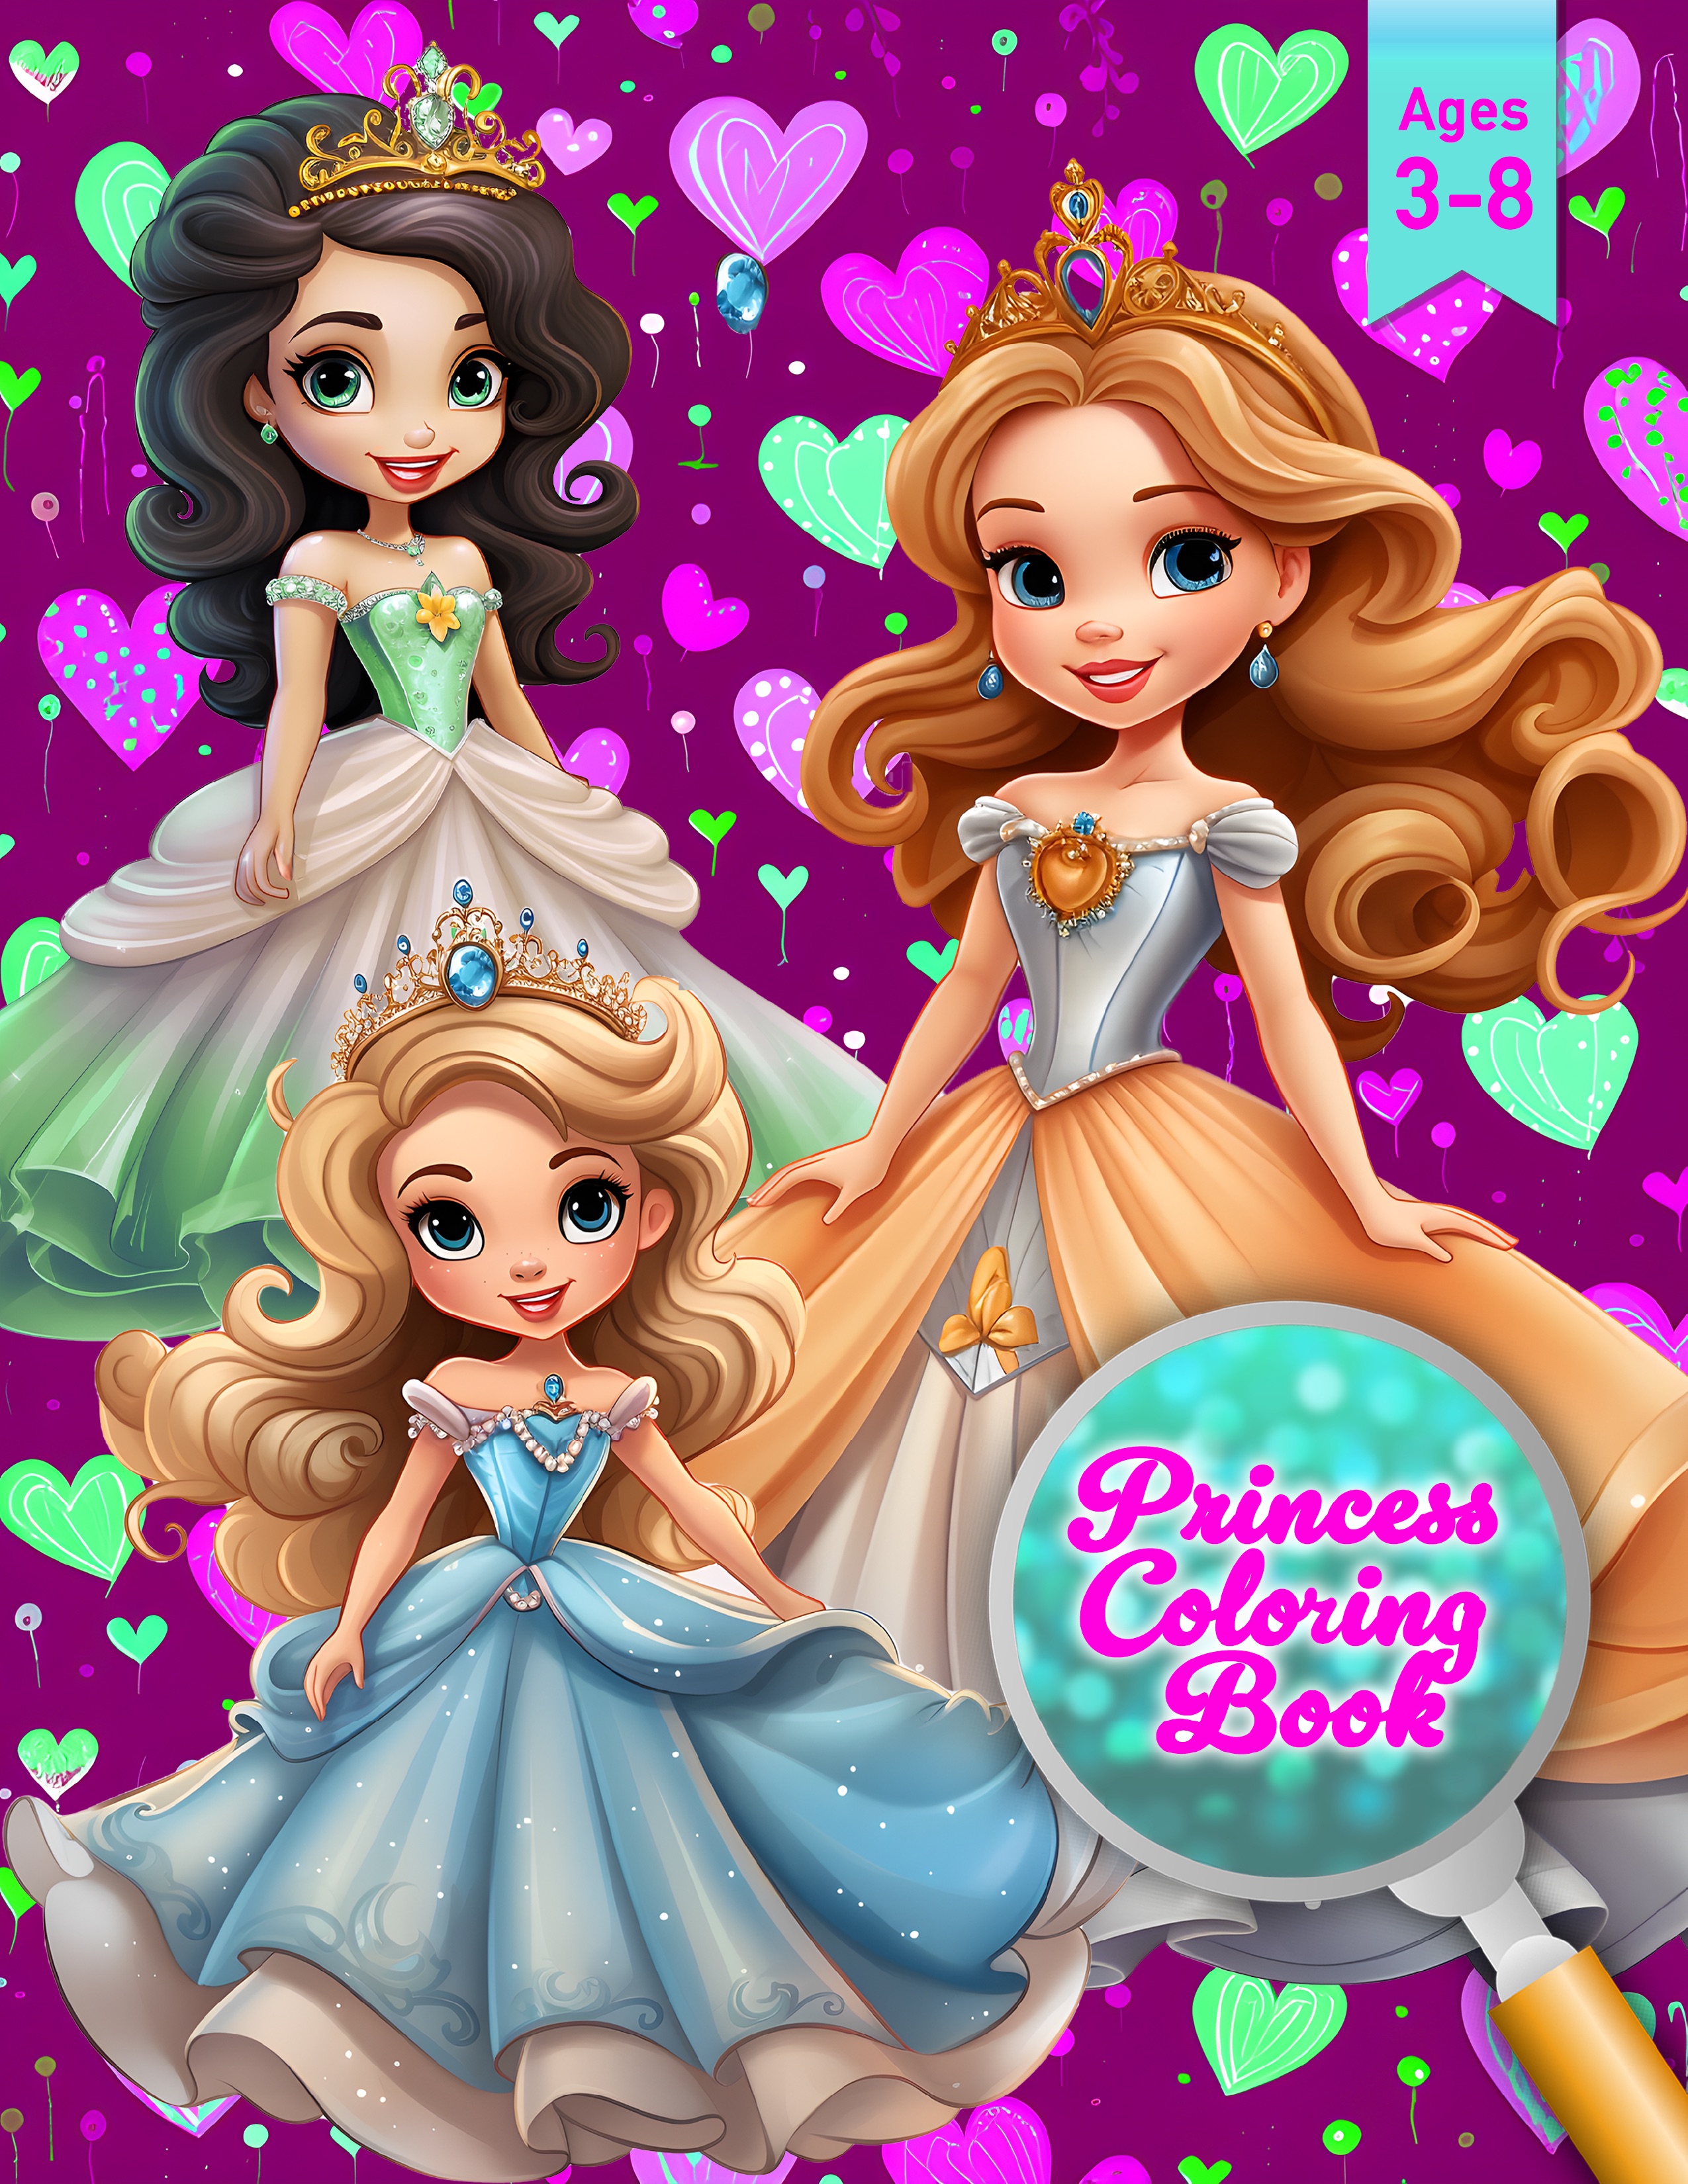 Princess Coloring Book Ages 3-8: Step into a Magical World of Coloring Fun! Adorable Creativity for Preschool, Kindergarten, and Girls Fine Motor Skills